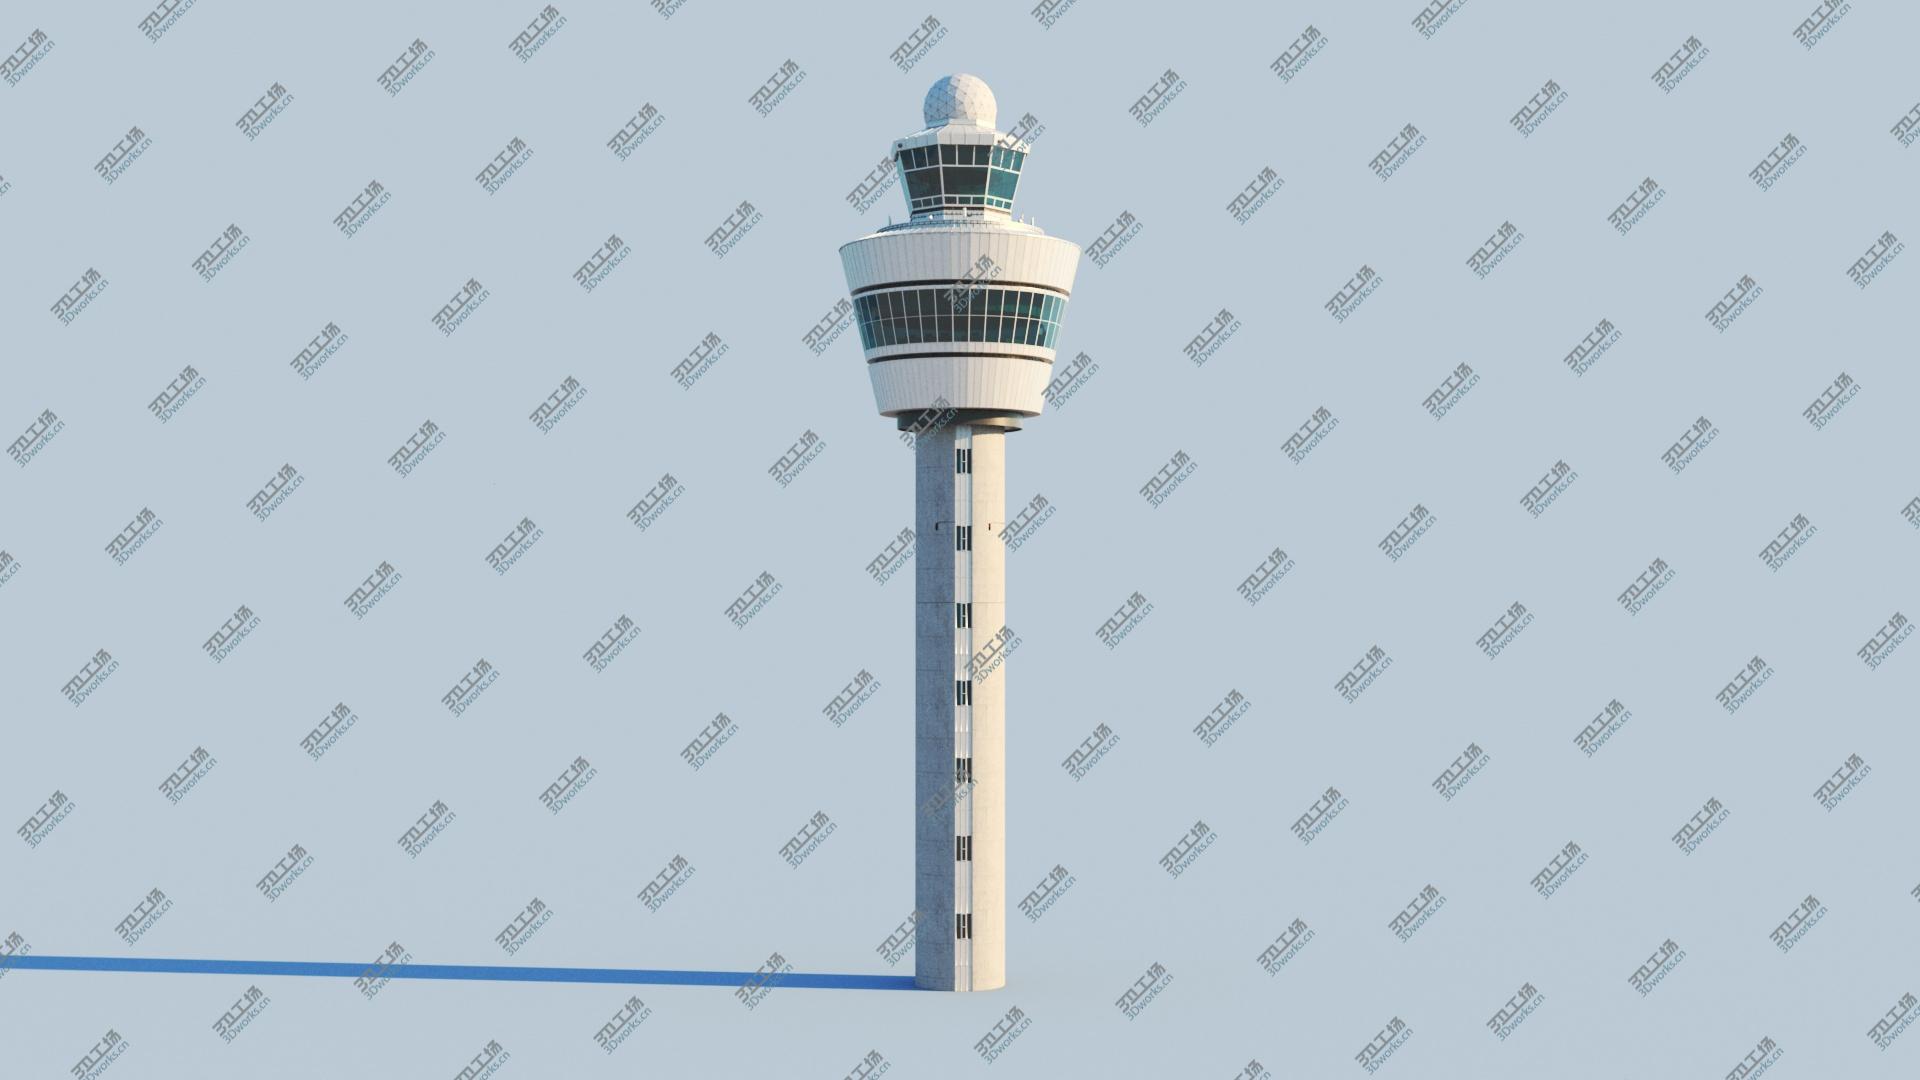 images/goods_img/2021040161/3D Airport Control Tower Amsterdam model/3.jpg